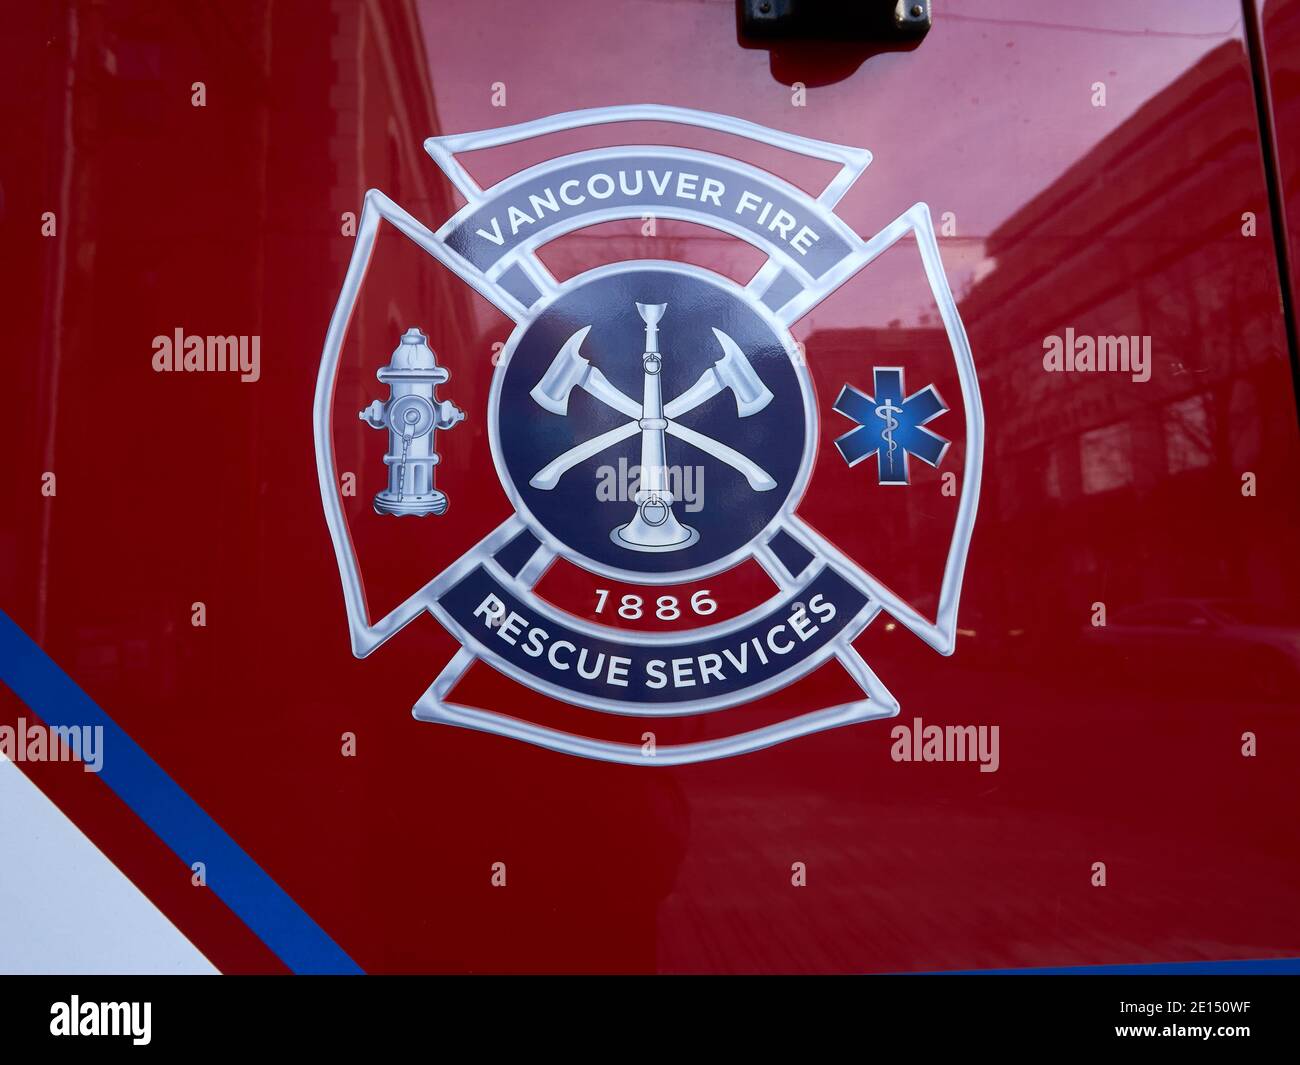 Vancouver Fire Rescue Services emblem, painted on the side of a fire engine in Vancouver, British Columbia, Canada Stock Photo